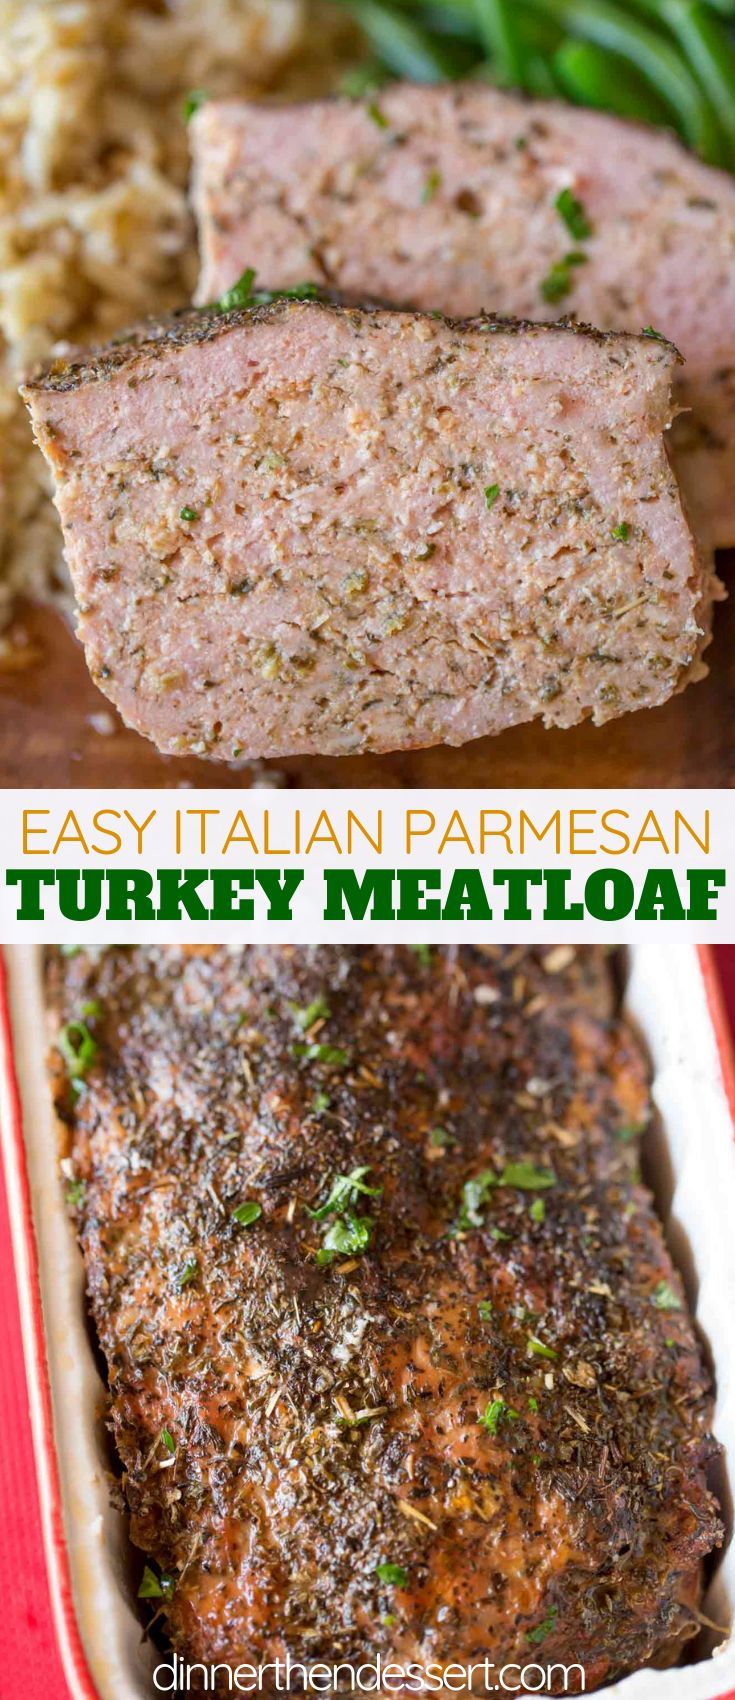 Italian Turkey Meatloaf that’s easy to make or meal prep with Italian herbs and spices, plenty of fresh garlic an… | Recipes, Beef recipes, The slow roasted italian